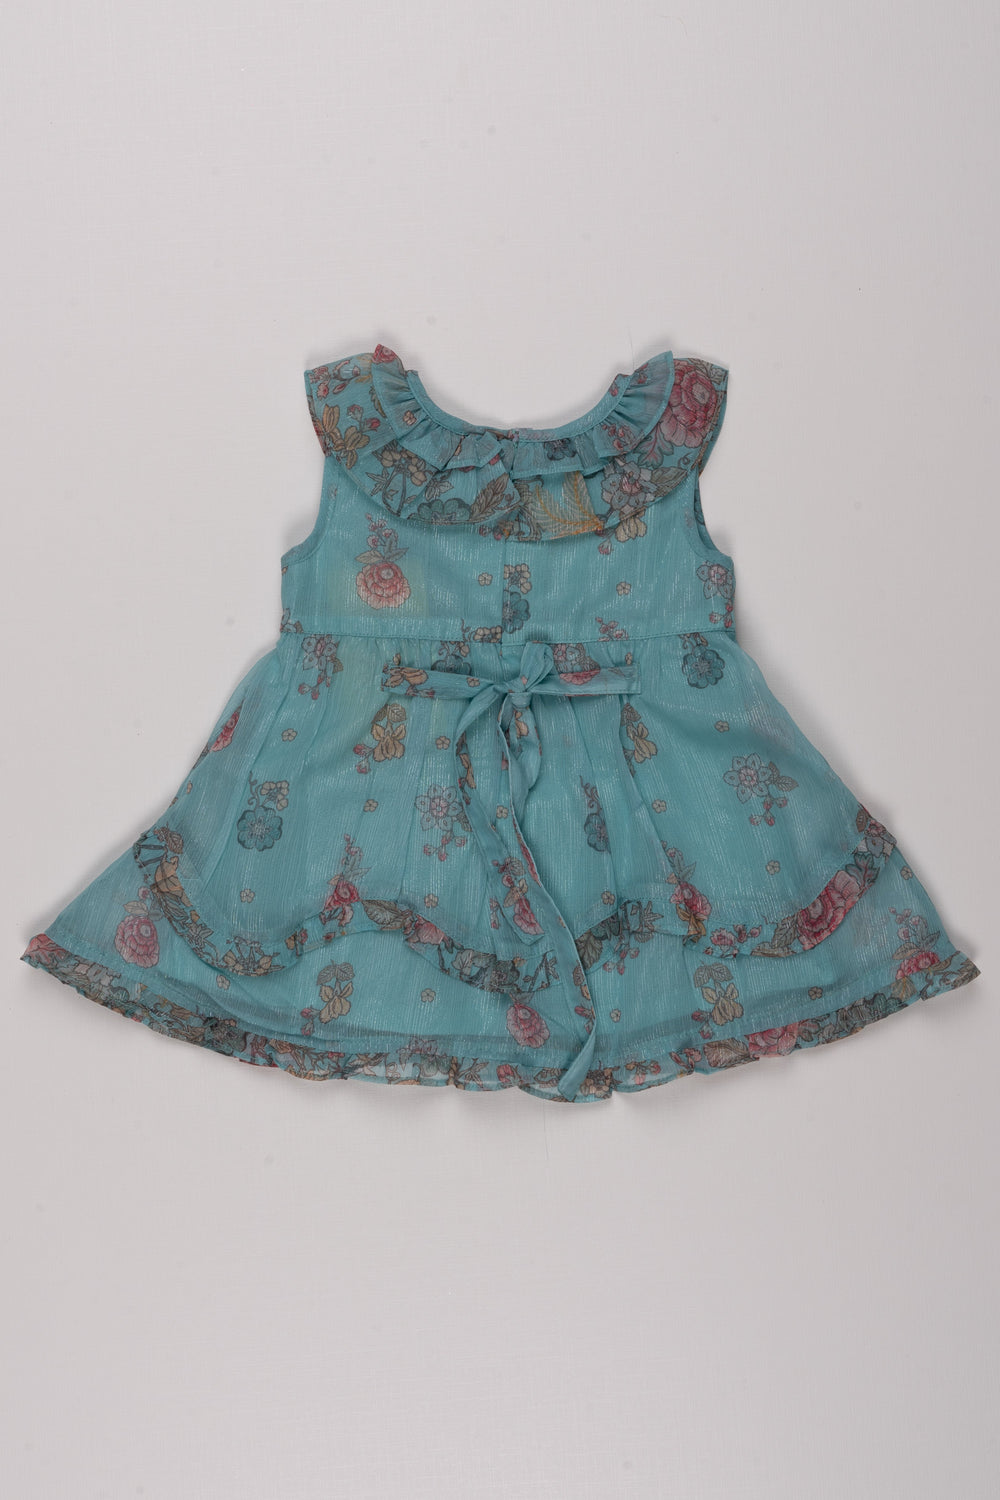 The Nesavu Baby Cotton Frocks Blue Serenity: Floral Elegance in Pleated Layered Baby Frock for Future Fashionistas Nesavu Infant dress designs | Baby wear collections | The Nesavu